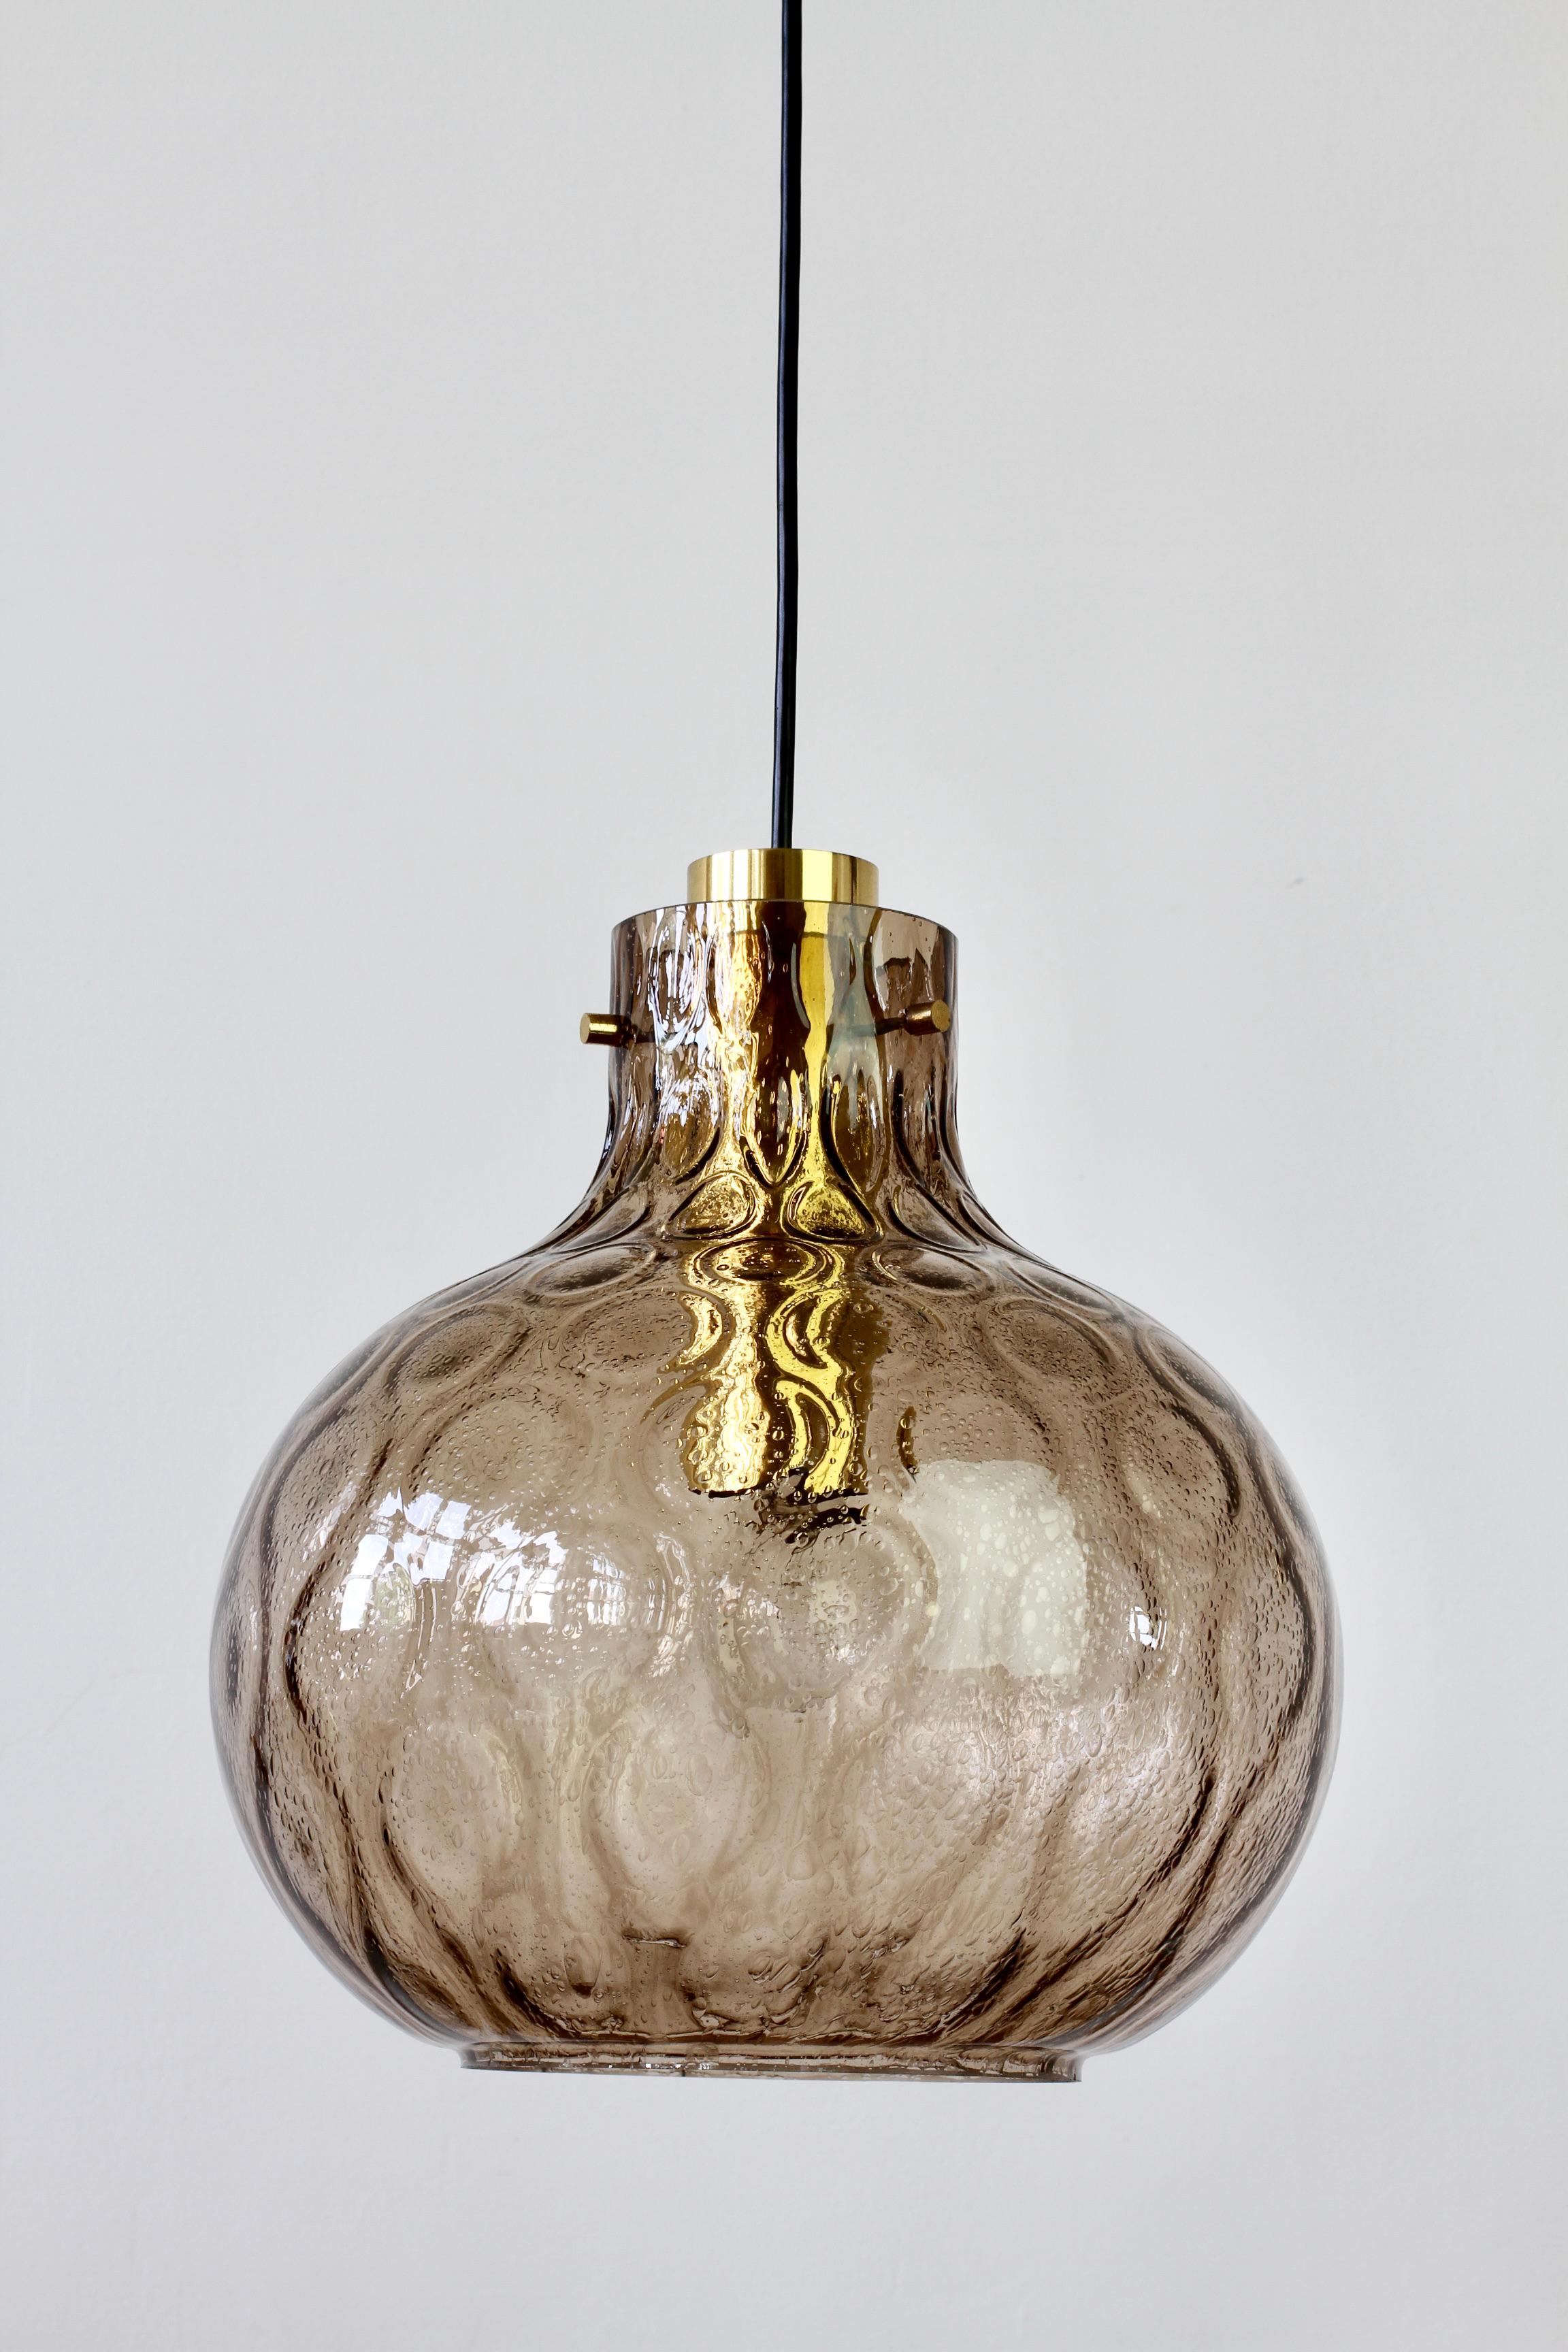 1 of 2 Large Vintage 1970s Bell Shaped Smoked Glass & Brass Globe Pendant Lights For Sale 1